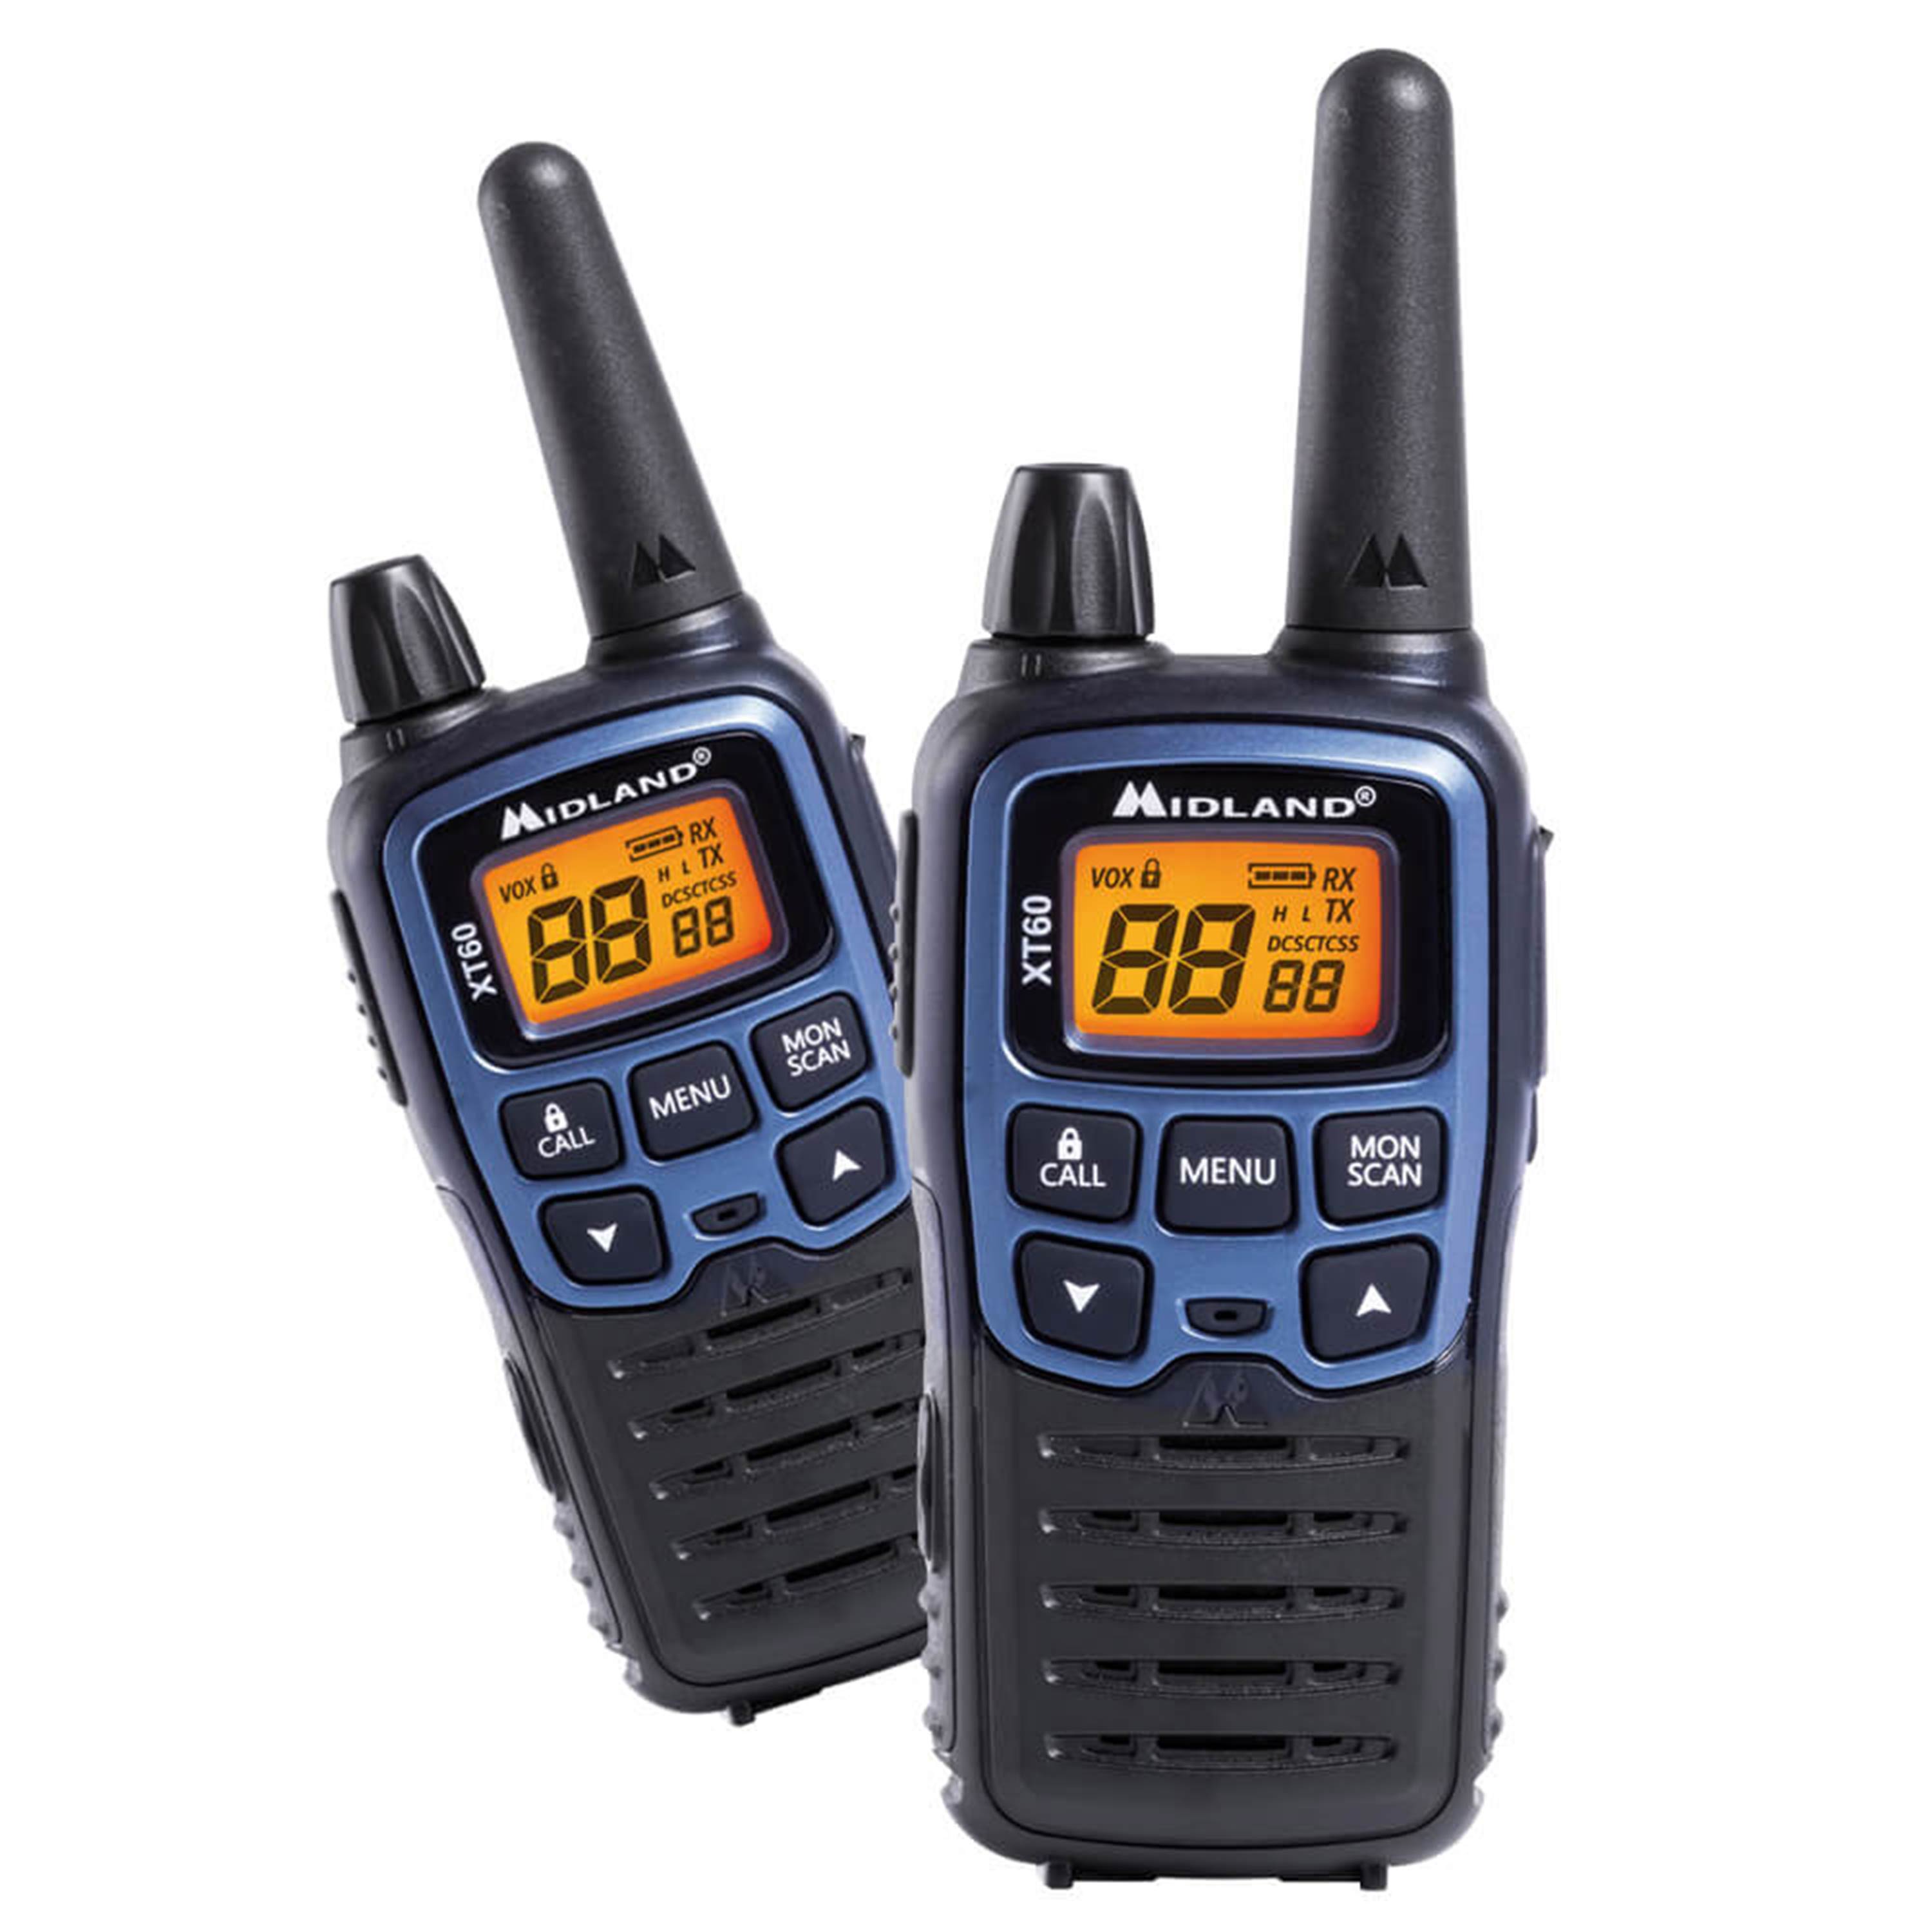 purchase-the-two-way-radio-midland-xt60-pair-pmr-lpd-by-asmc